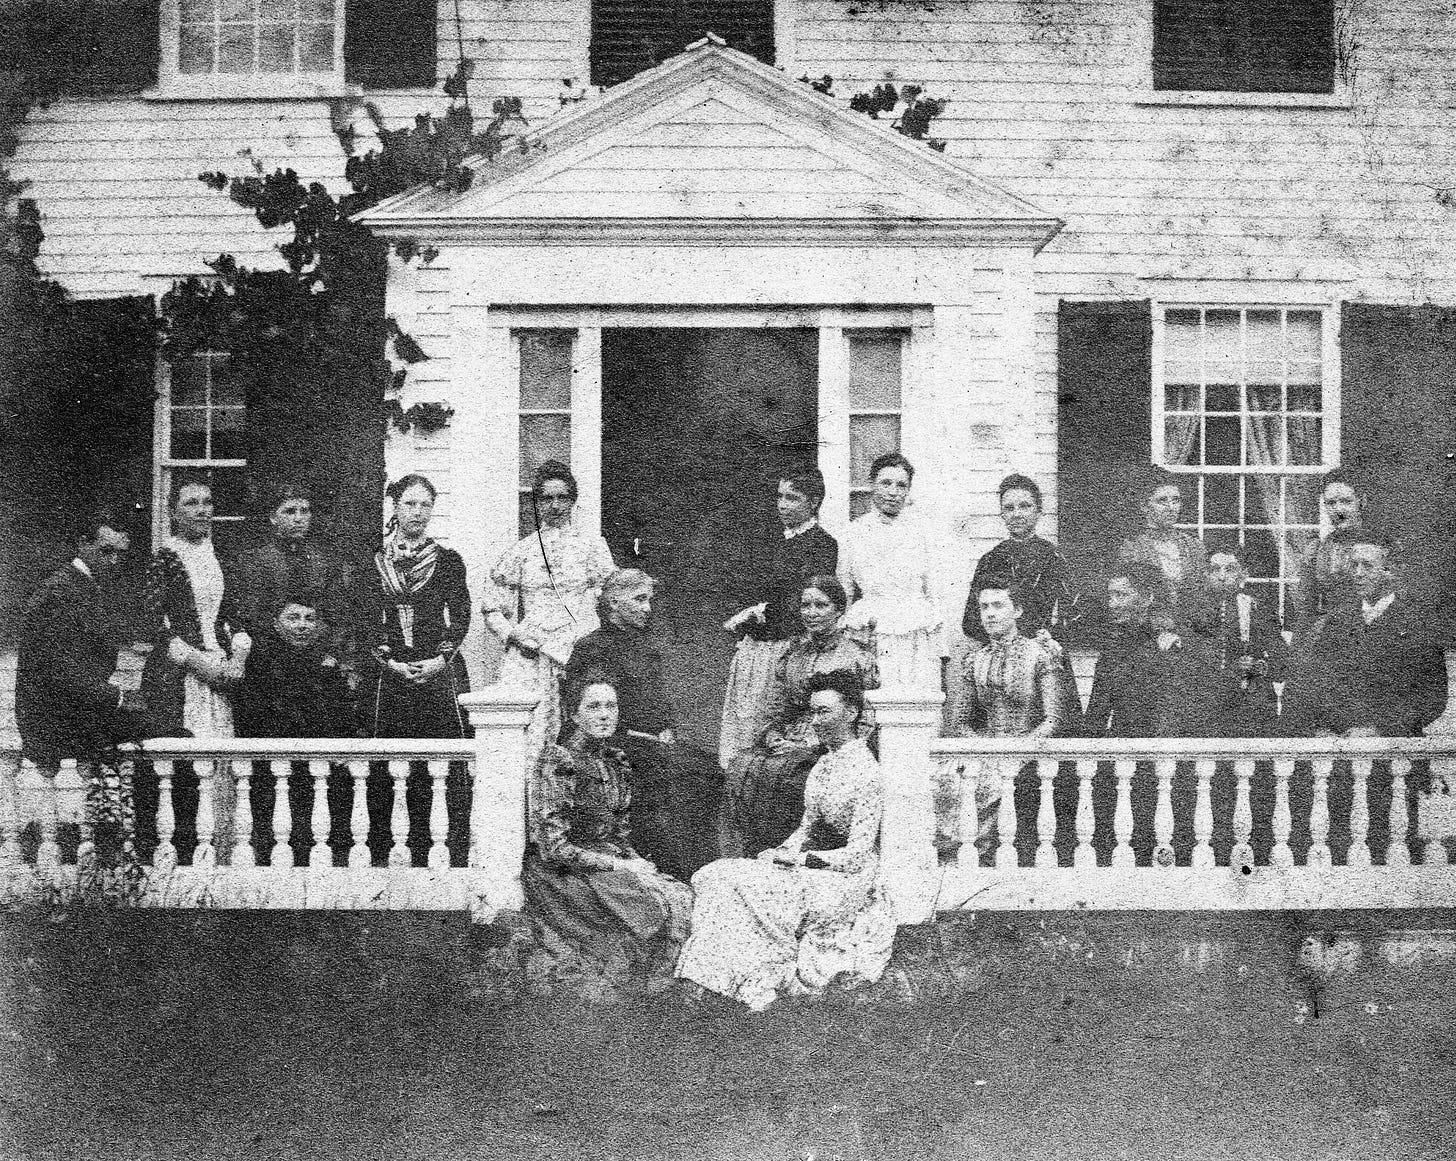 Group photo of women's study group